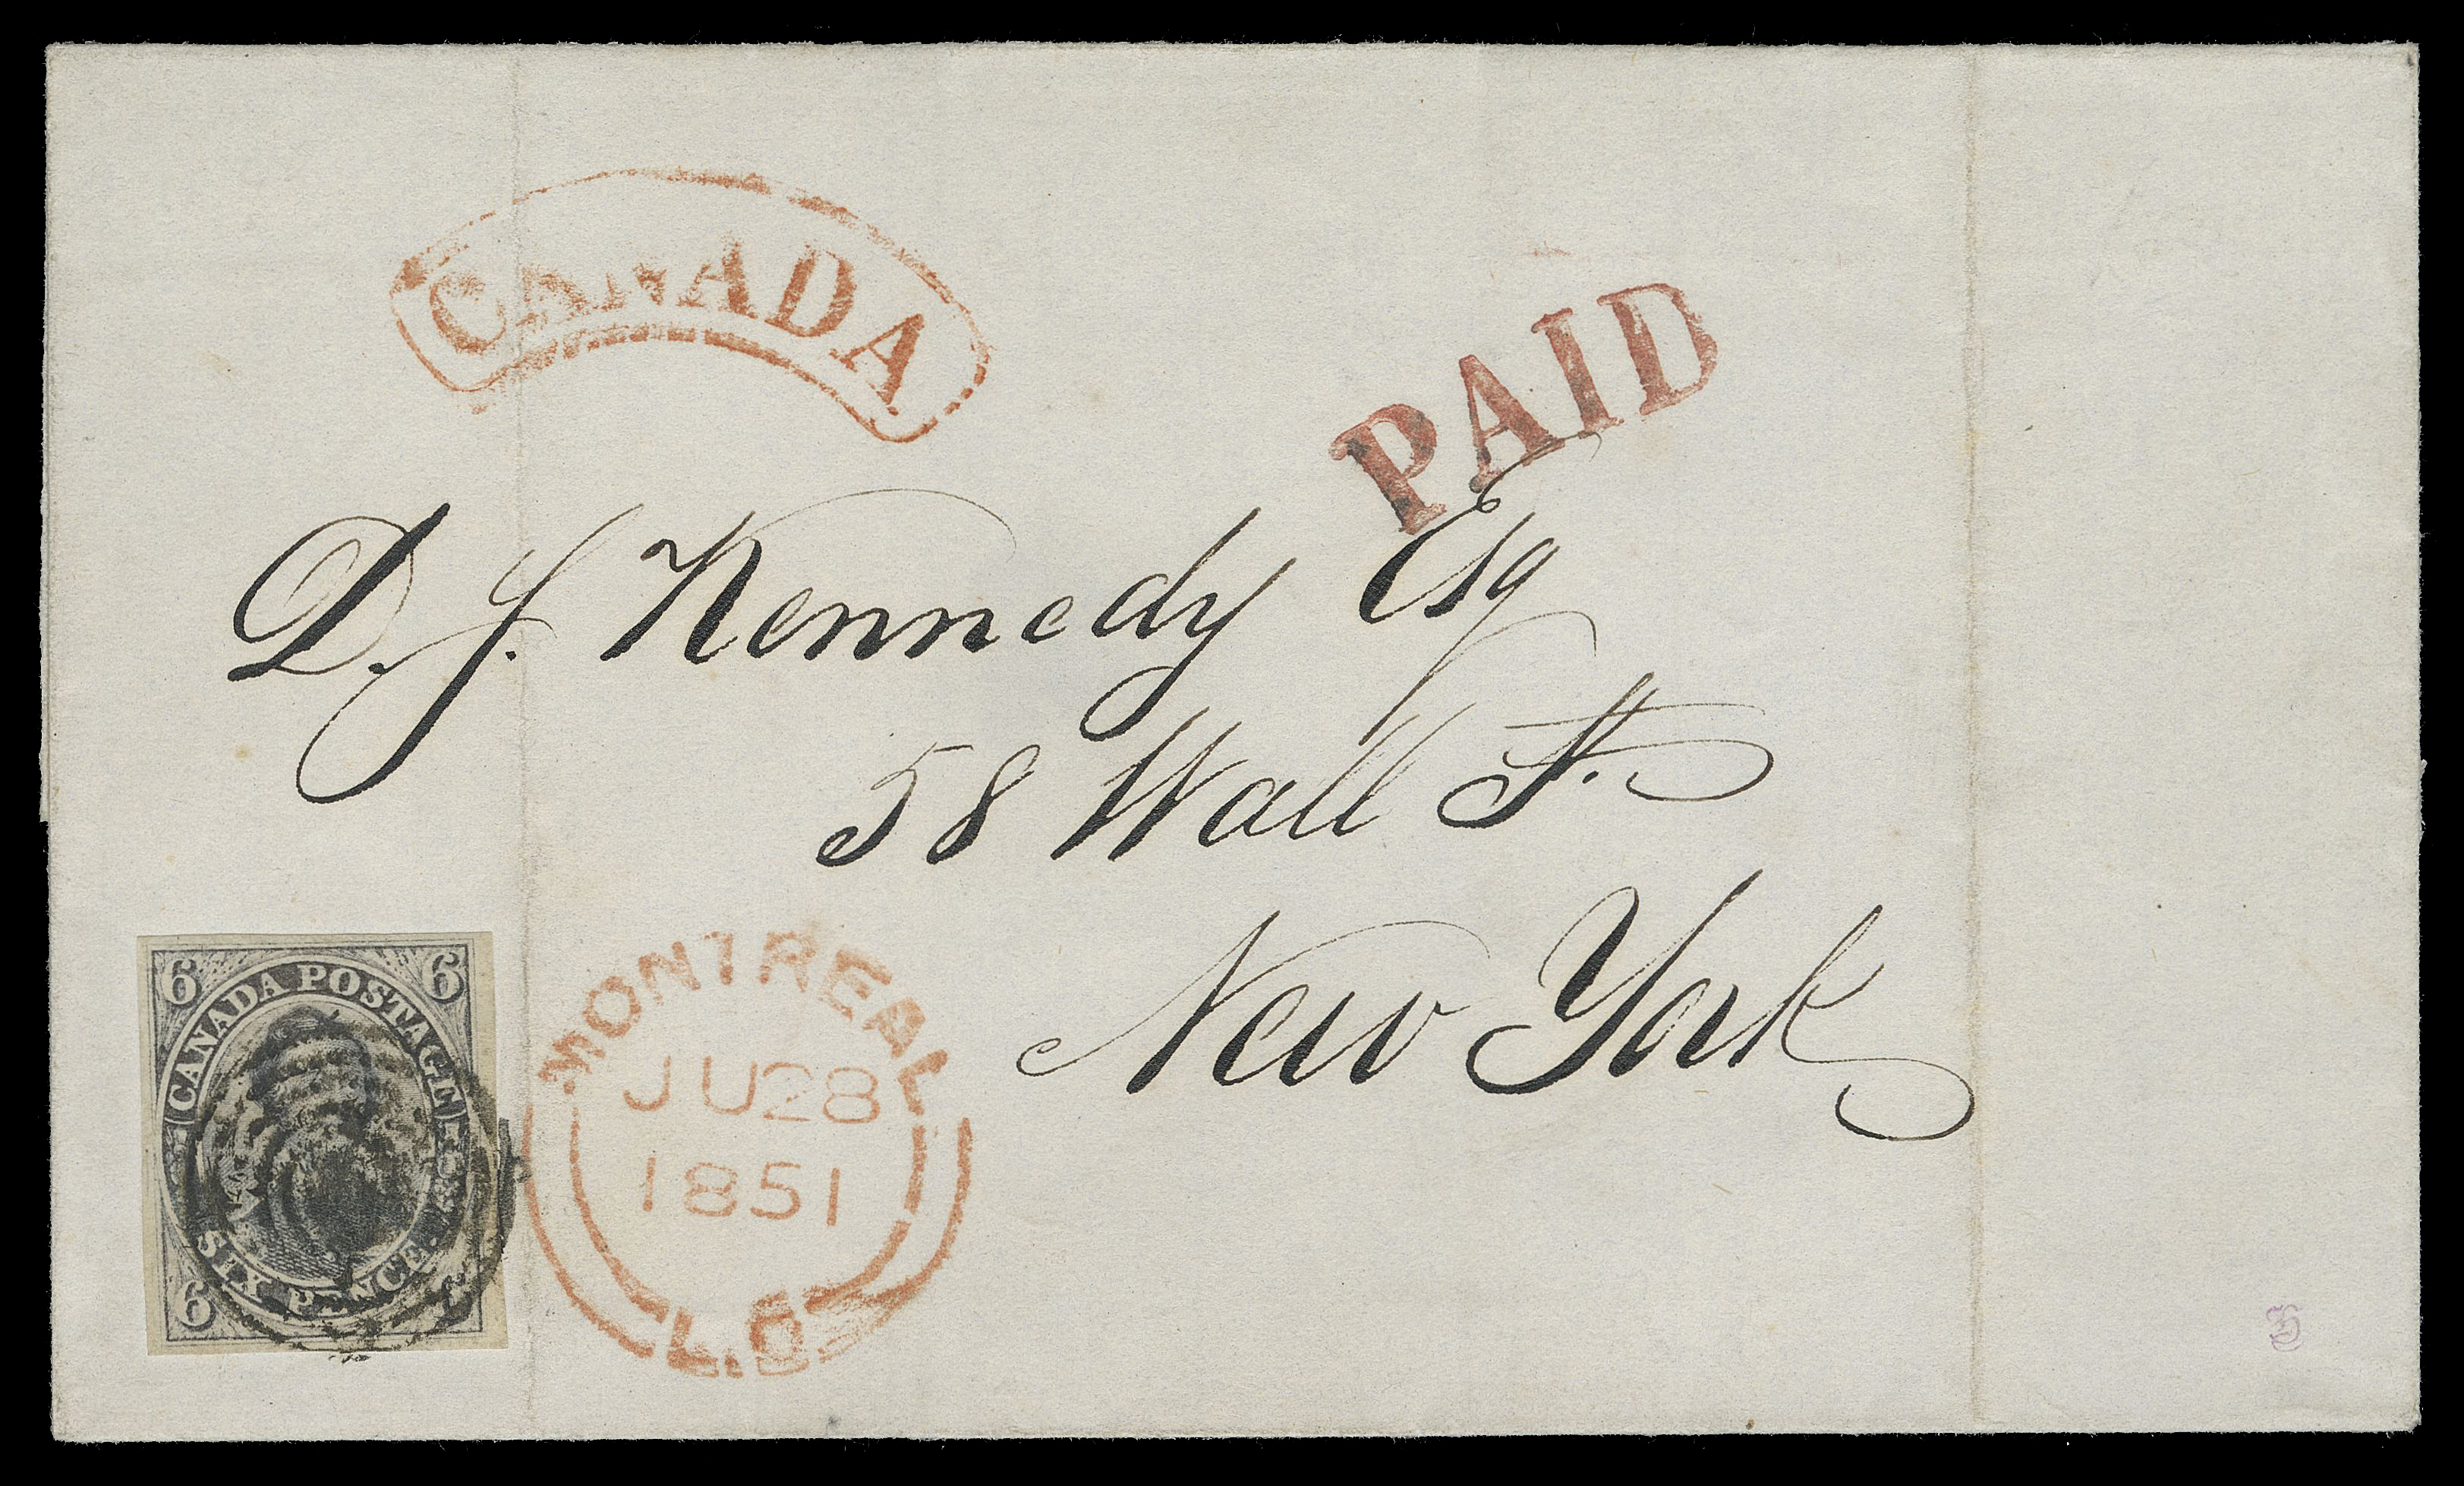 SIX PENCE AND TEN CENTS  1851 (June 28) A superb, very fresh cover to New York from the well-known Kennedy correspondence, bearing a choice 6p slate violet on laid paper with prominent laid lines, ample to large margins, rich colour and sharp impression, tied by concentric rings, couple file folds away from stamp, Montreal JU 28 1851 double arc dispatch, "CANADA" arc handstamp and PAID struck in red; no backstamp as customary for mail to the US. A beautiful single-franking cover mailed in the second month of usage, XF (Unitrade 2)

Provenance: The "Harbour" Collection of Canada